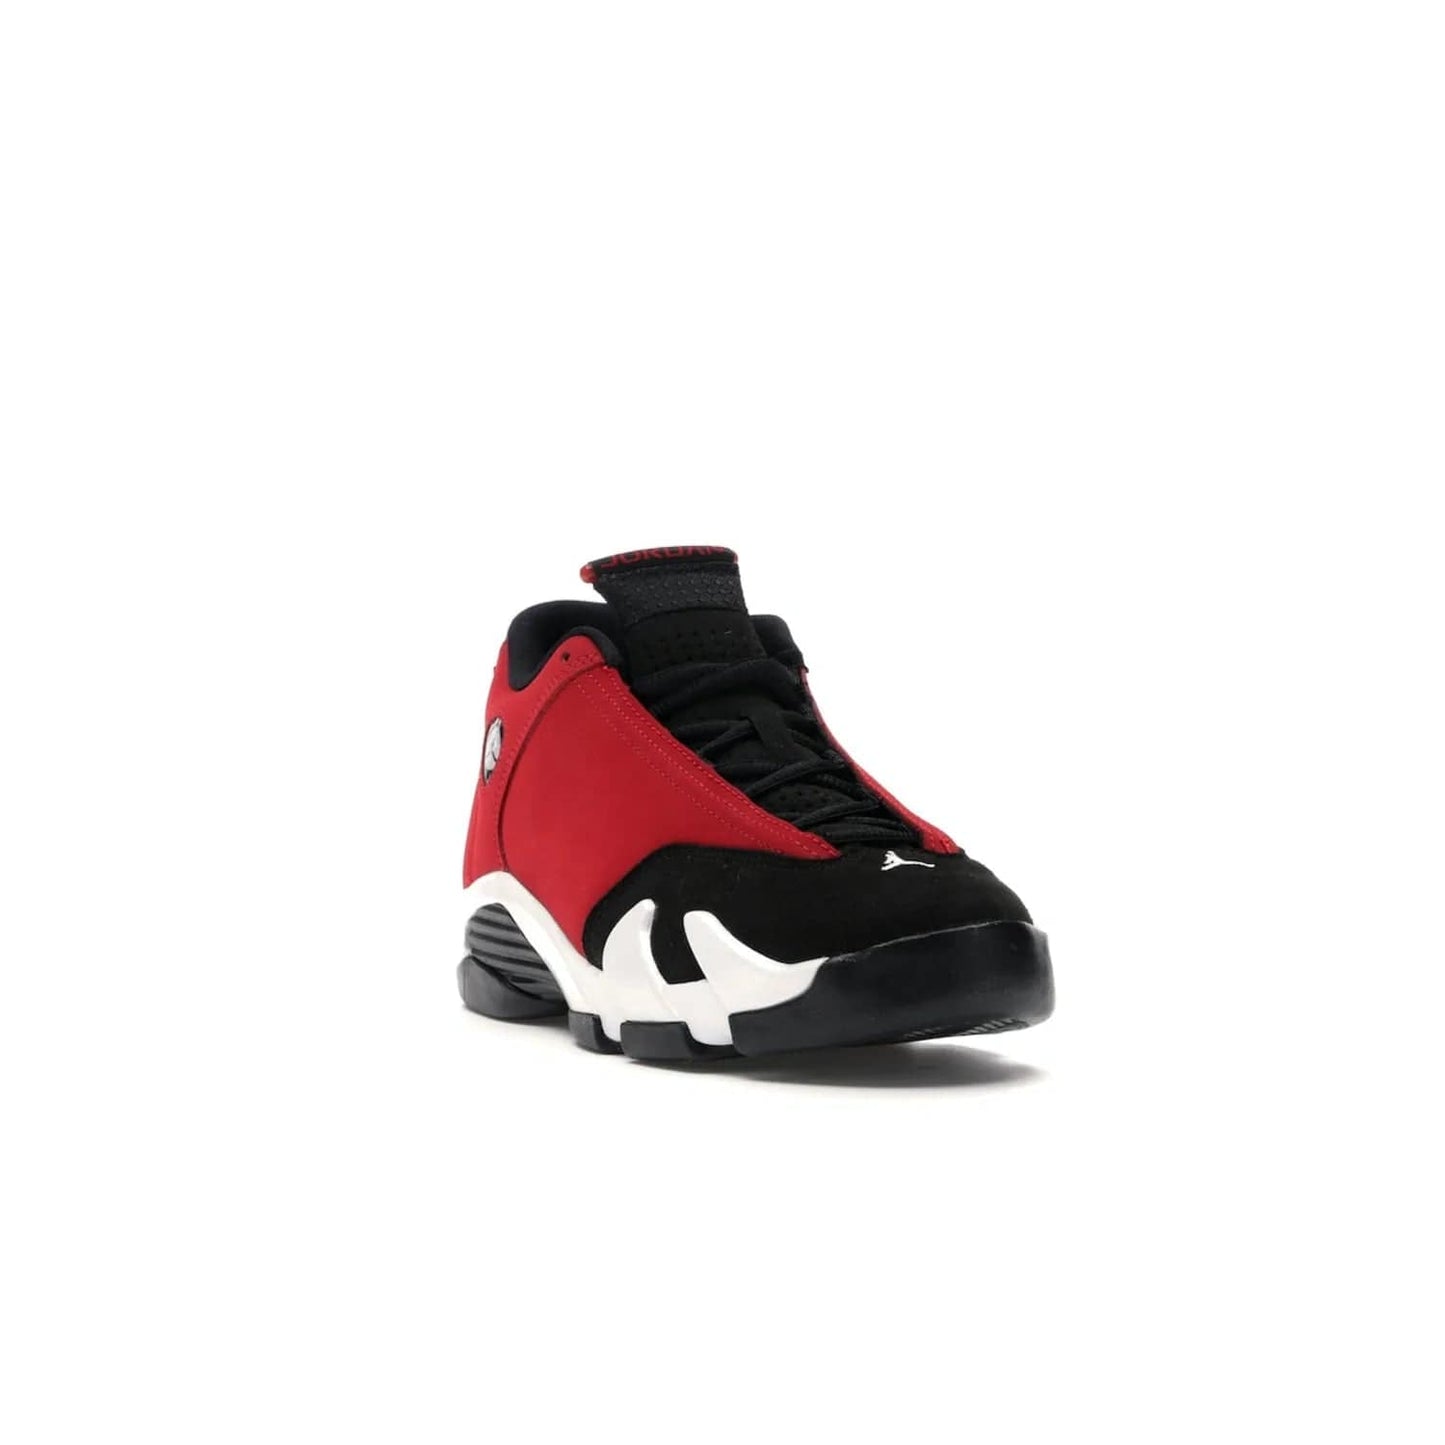 Jordan 14 Retro Gym Red Toro (GS) - Image 7 - Only at www.BallersClubKickz.com - Introducing the Air Jordan 14 Retro Toro GS – perfect for young grade schoolers. Combining black and red suede, Zoom Air cushioning and a Jumpman logo. Get yours on 2 July for $140!